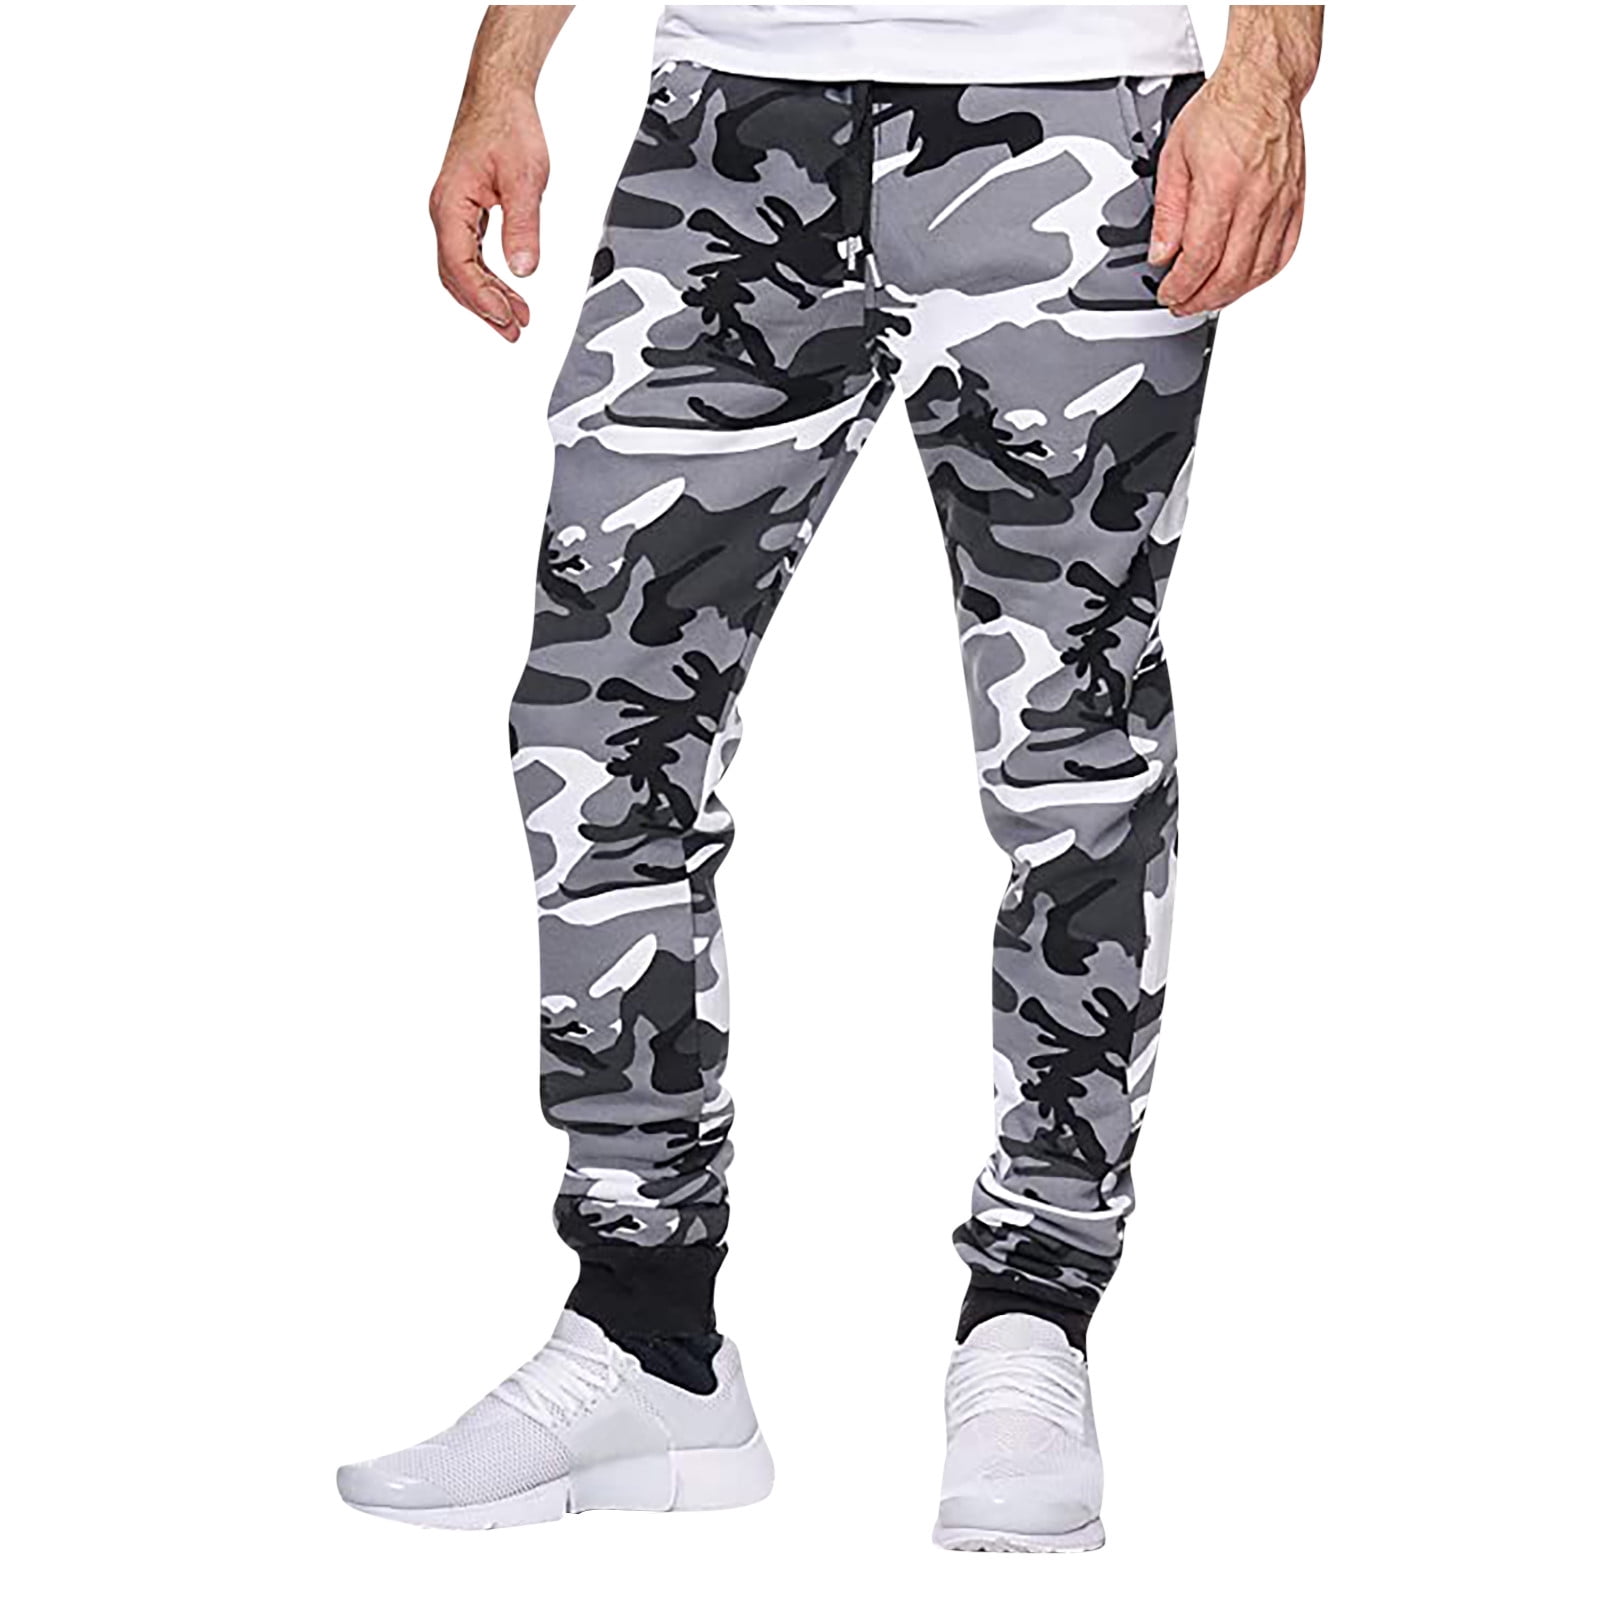 Jyeity turn head all Fall Camouflage Tracksuit Bottoms Jogging Bottoms ...